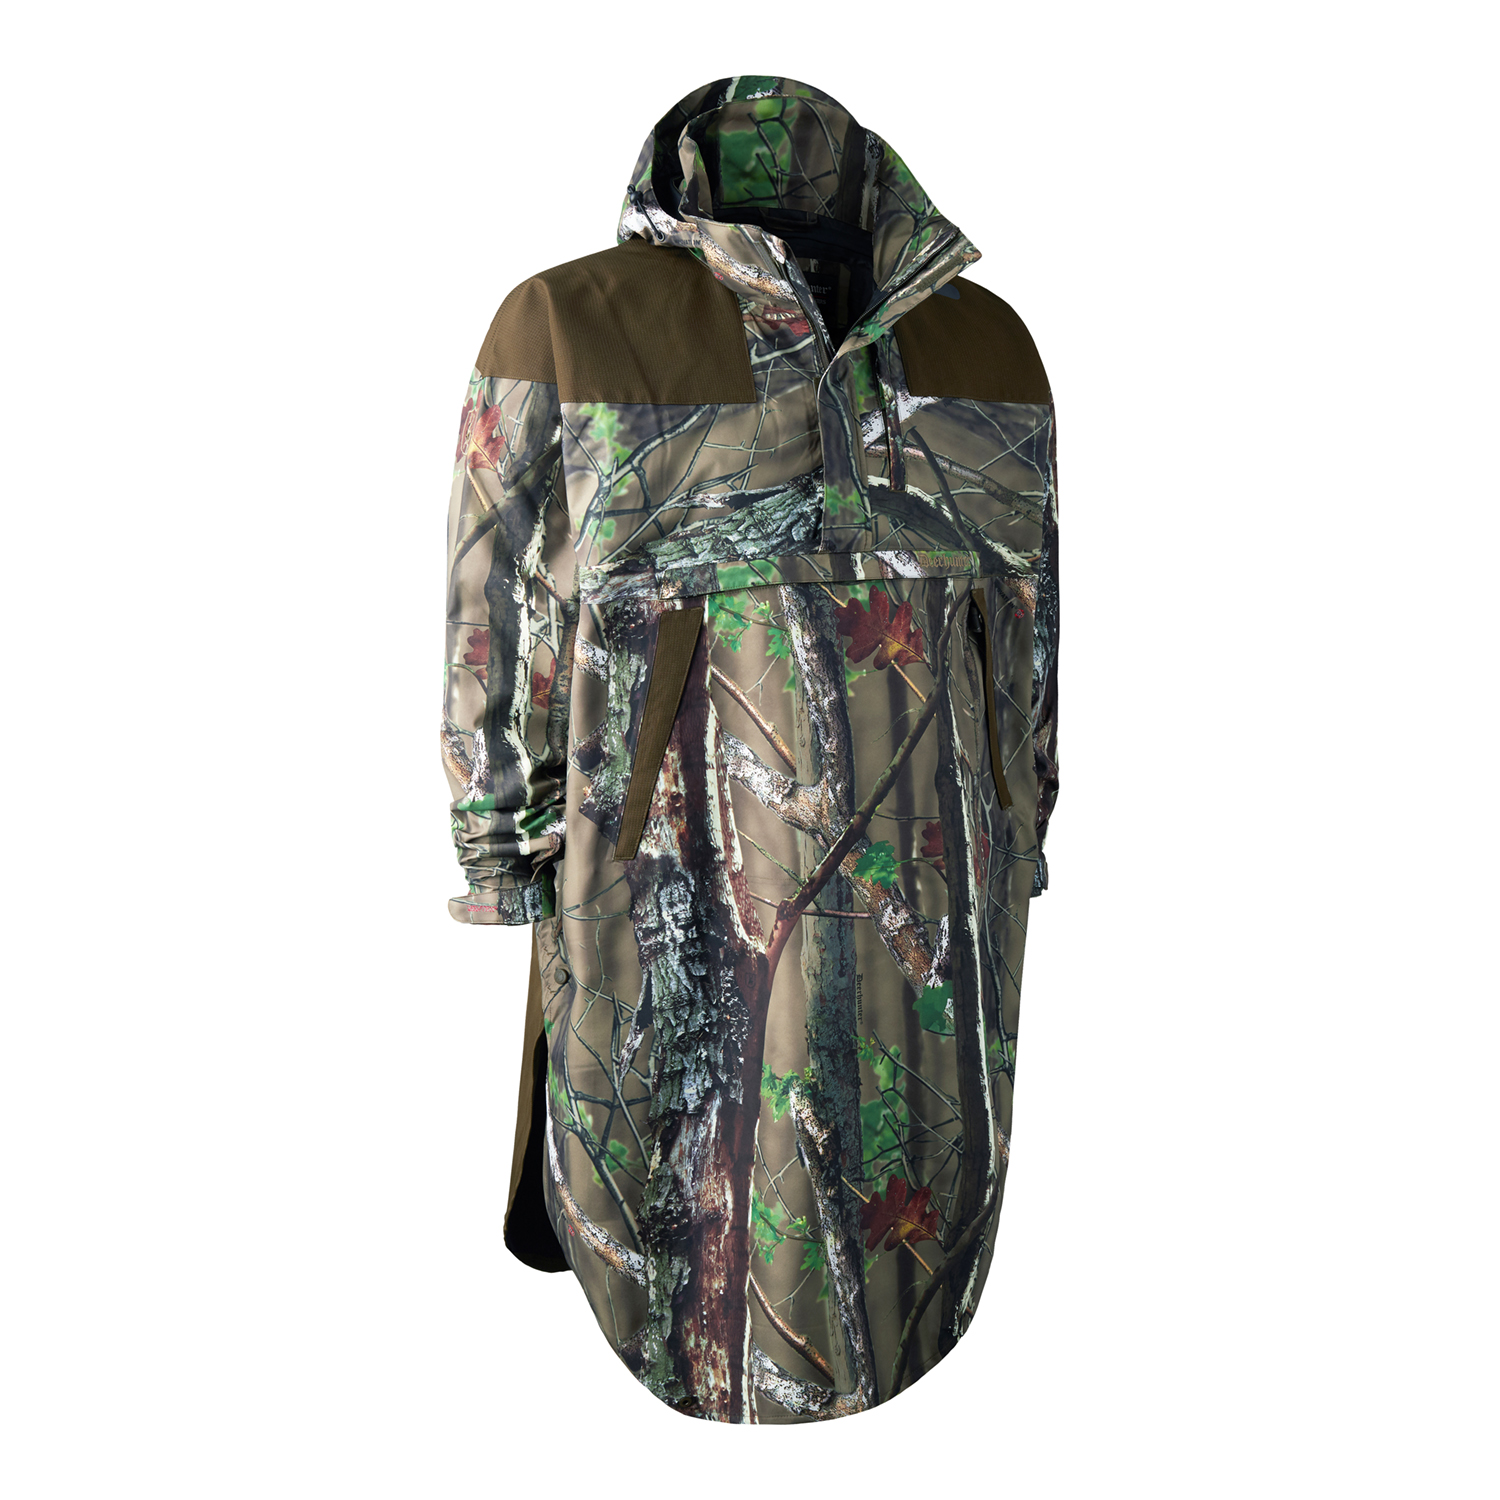 Track regn anorak - Innovation GH Camouflage - XL thumbnail